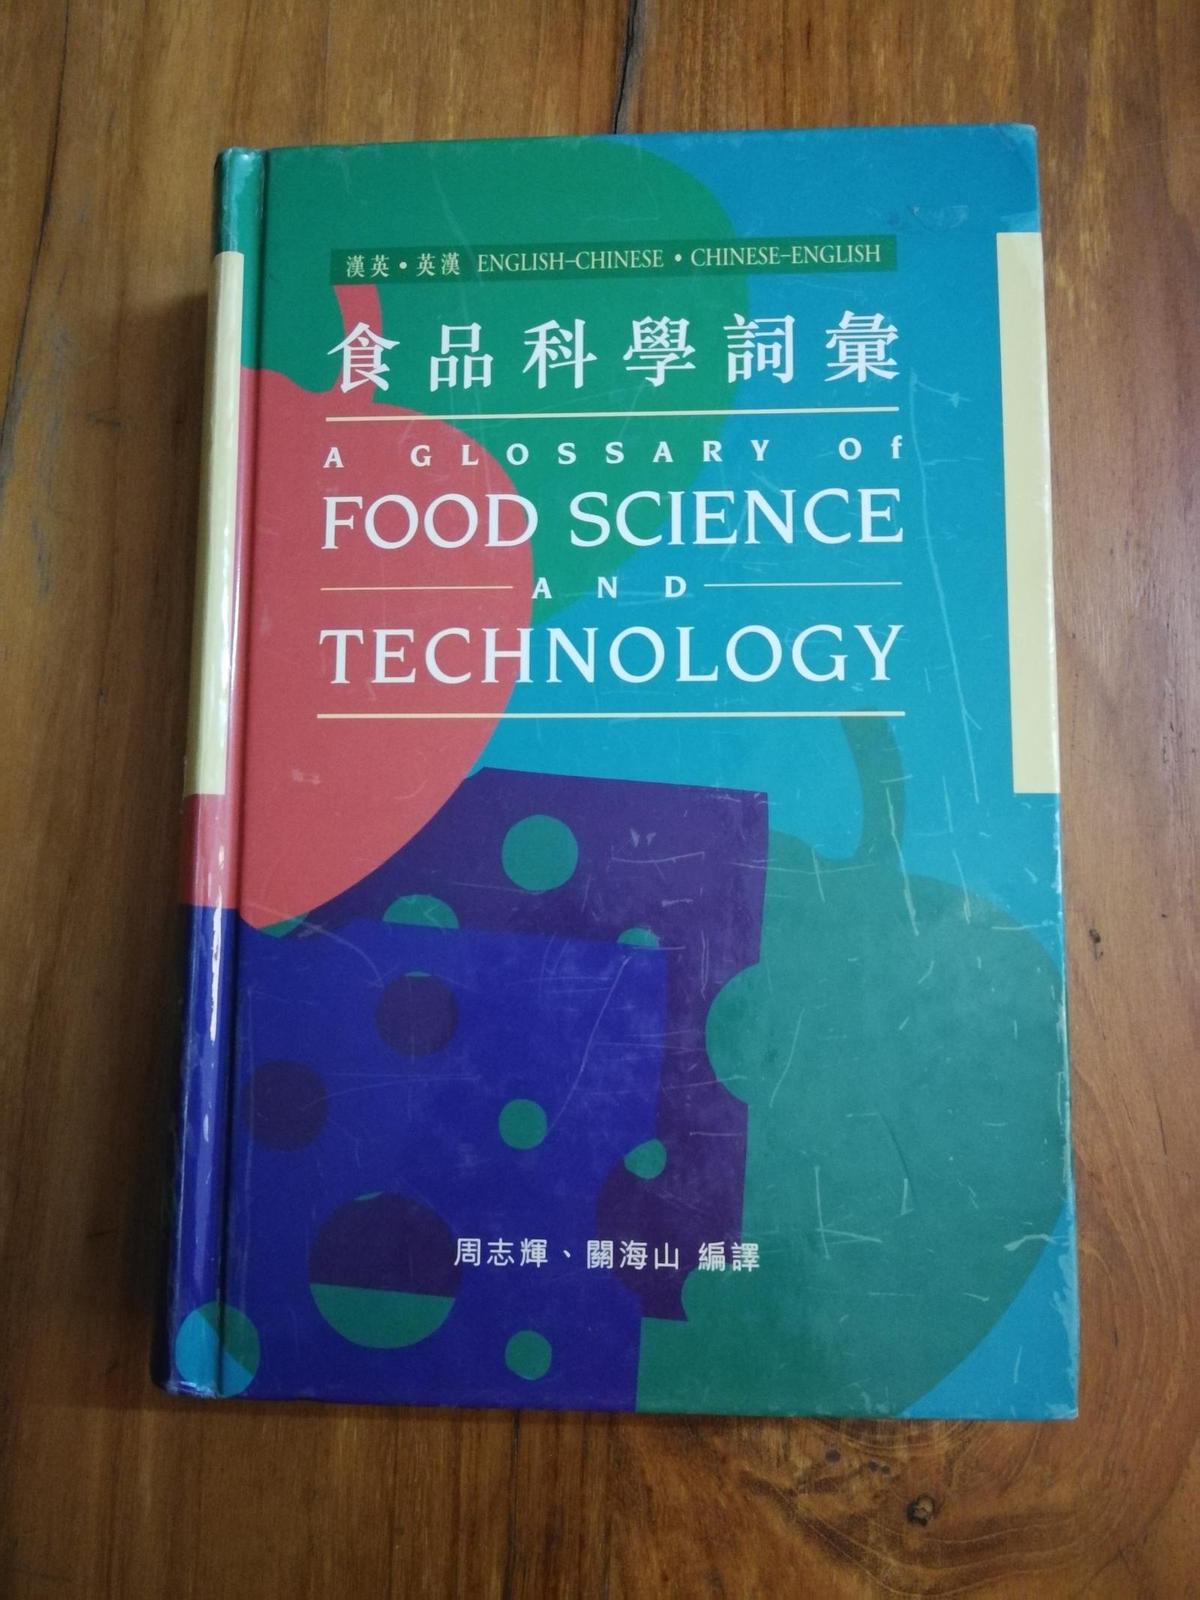 A Glossary of Food Science and Technology 食品科学词汇【英汉双语精装本】